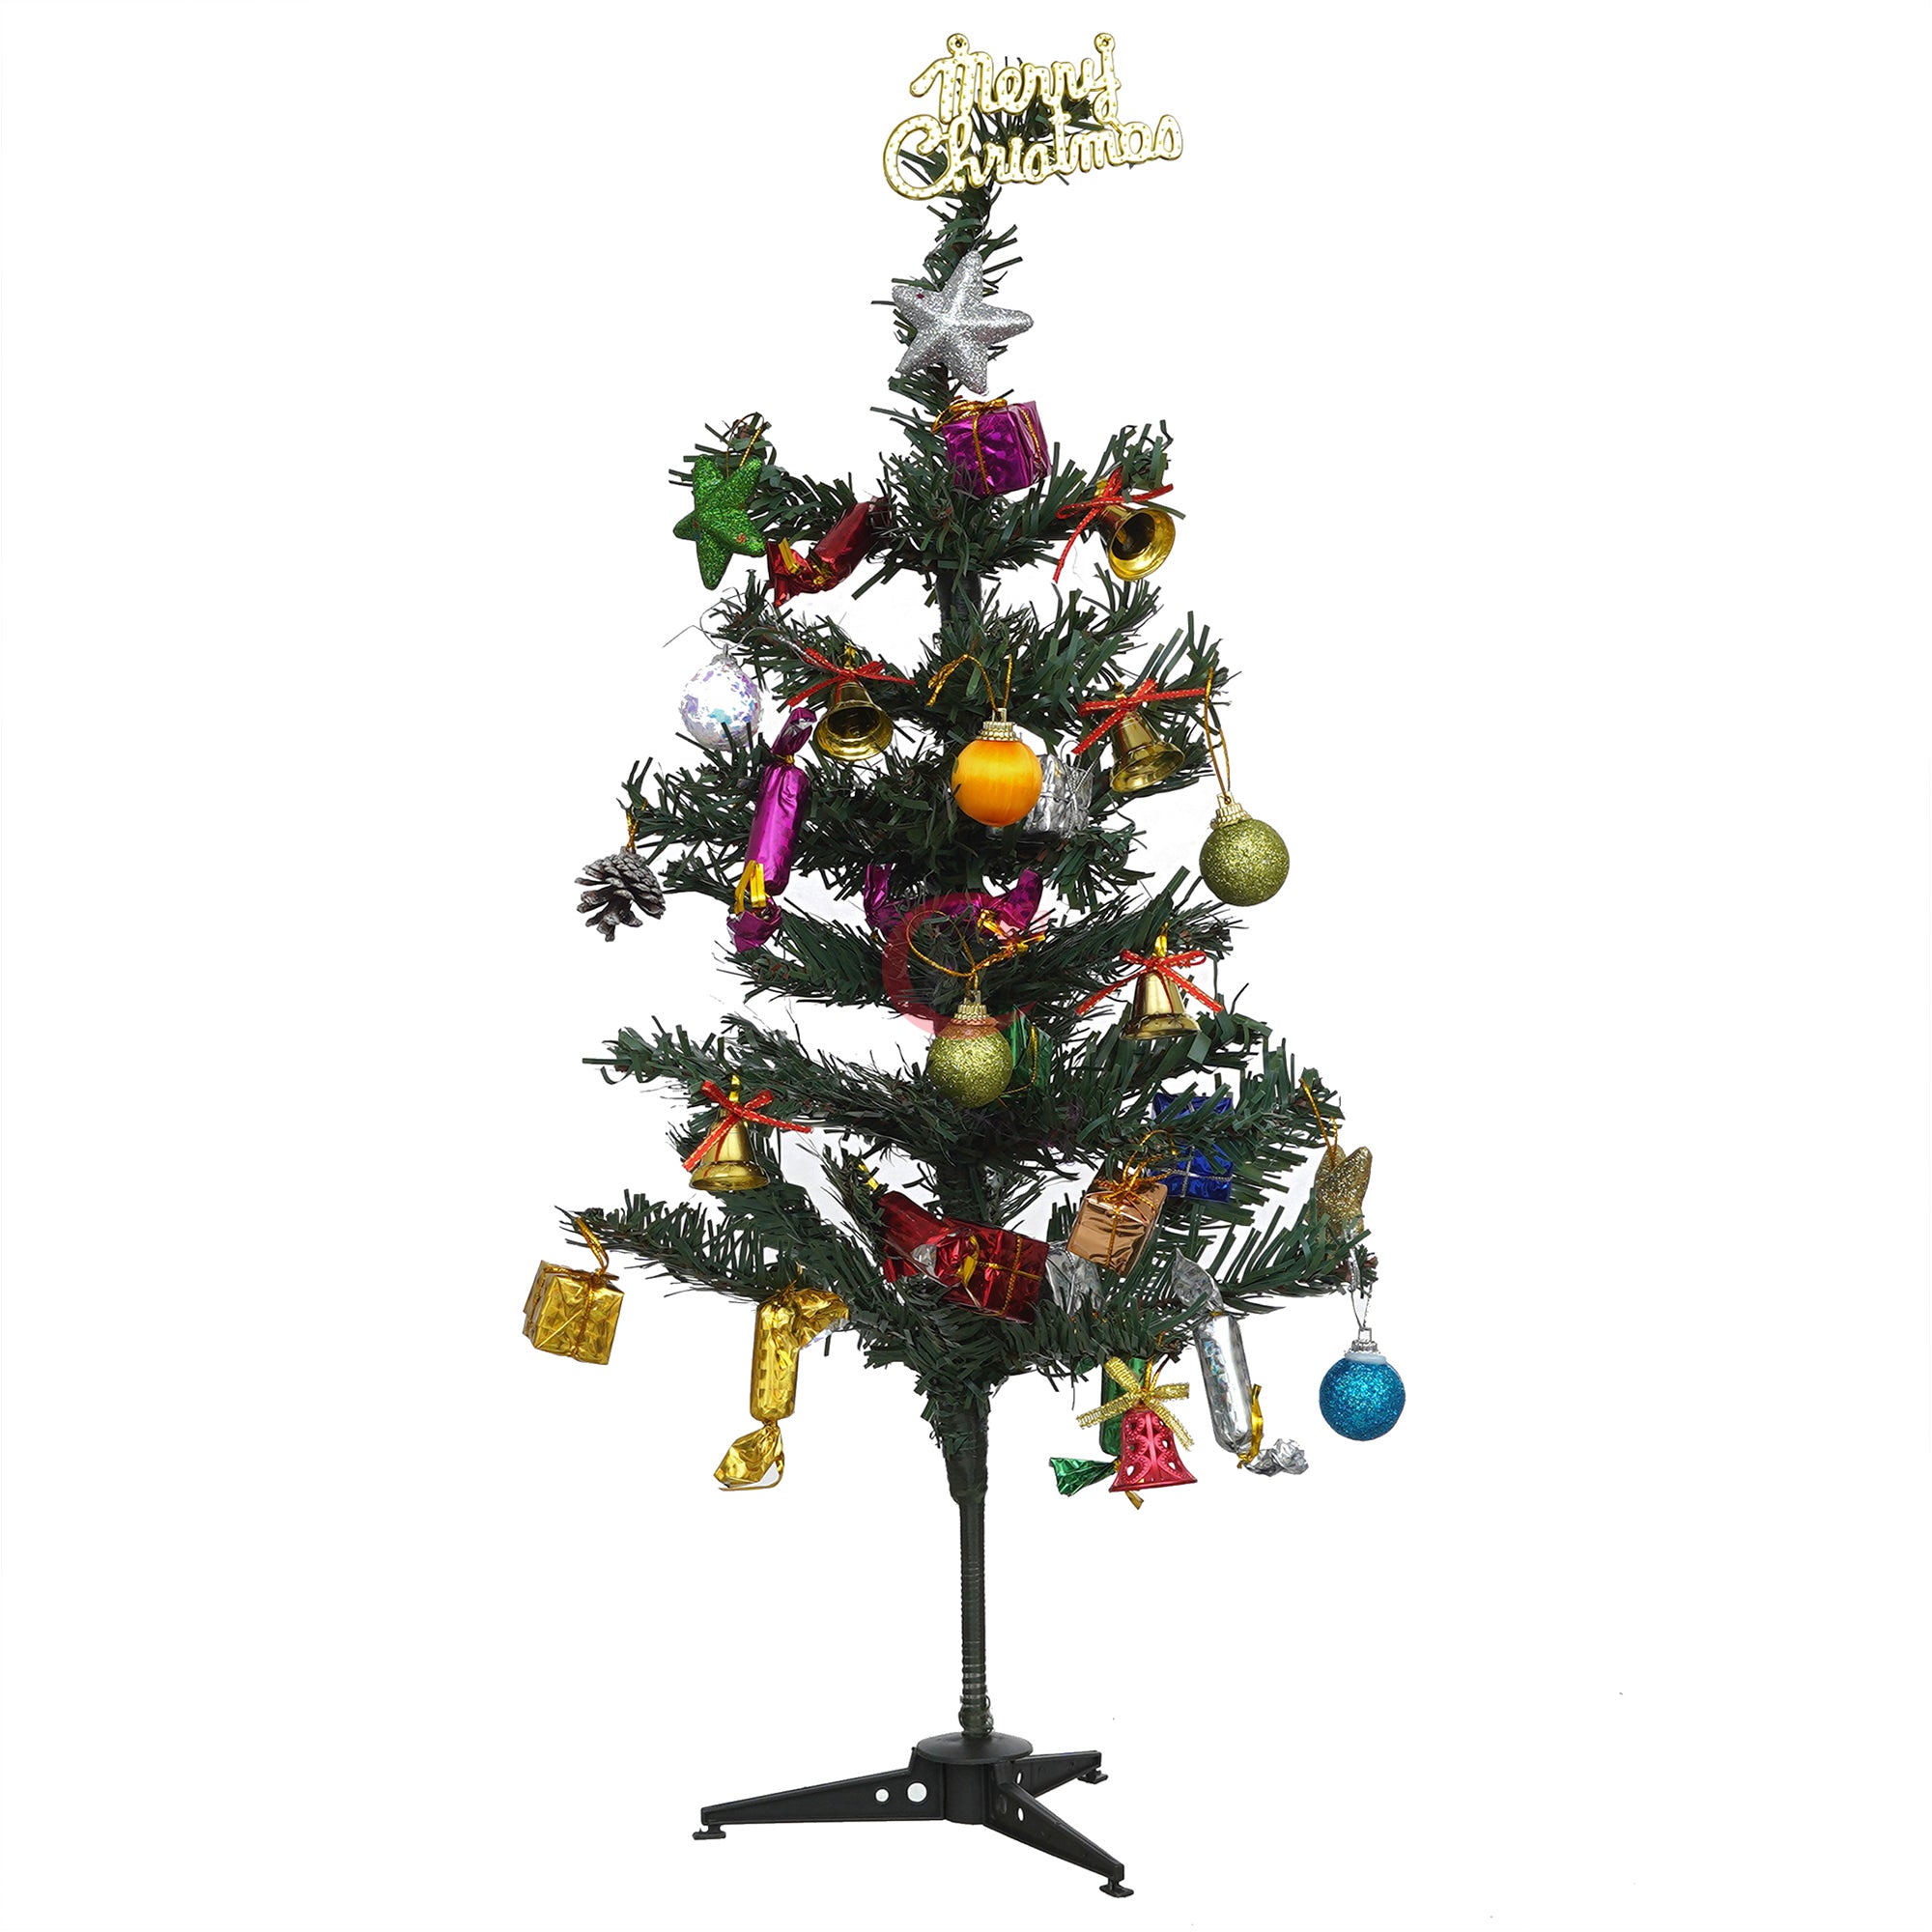 eCraftIndia 2 Feet Green Artificial Christmas Tree Xmas Pine Tree with Metal Stand - Xmas Tree for Indoor, Outdoor, Home, Living Room, Office, Church Decor - Merry Christmas Decoration Item 4